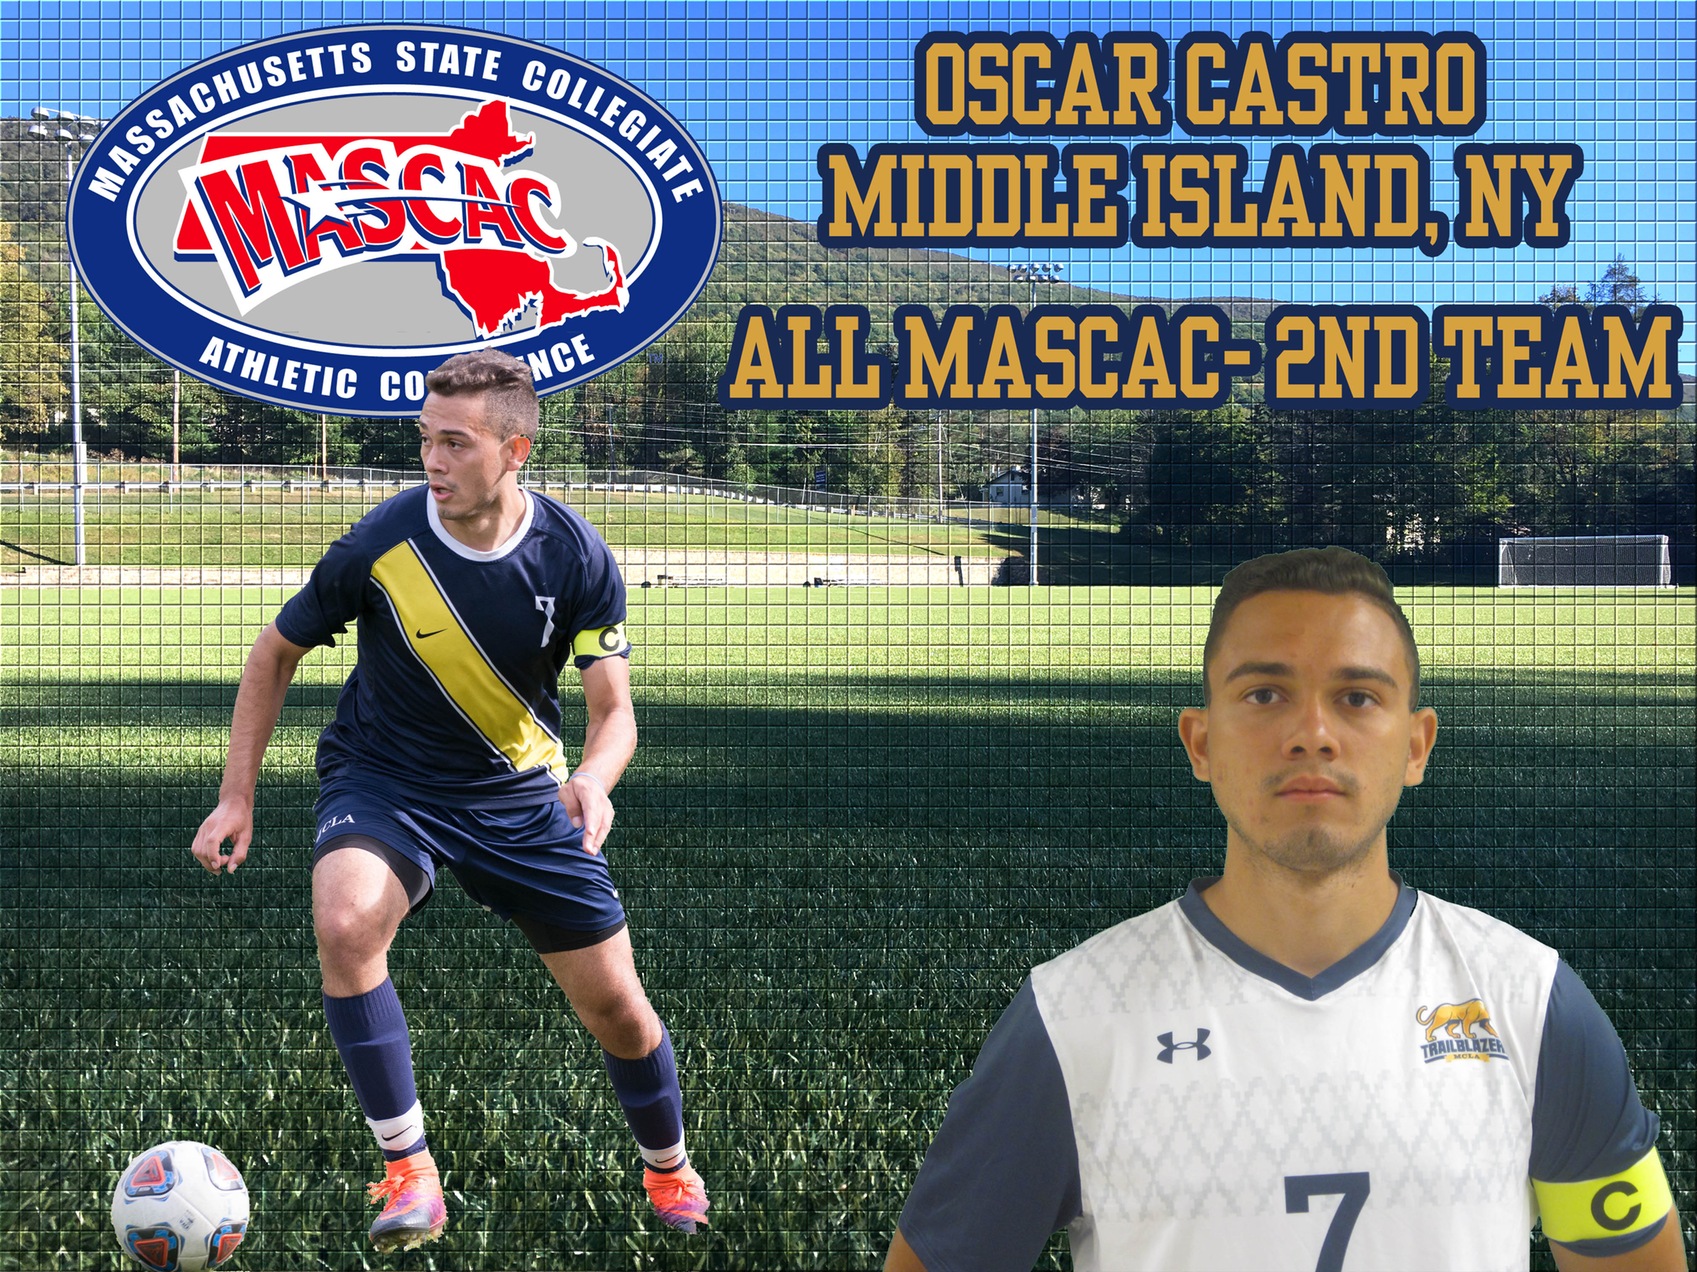 Castro earns All MASCAC honors in Men's Soccer